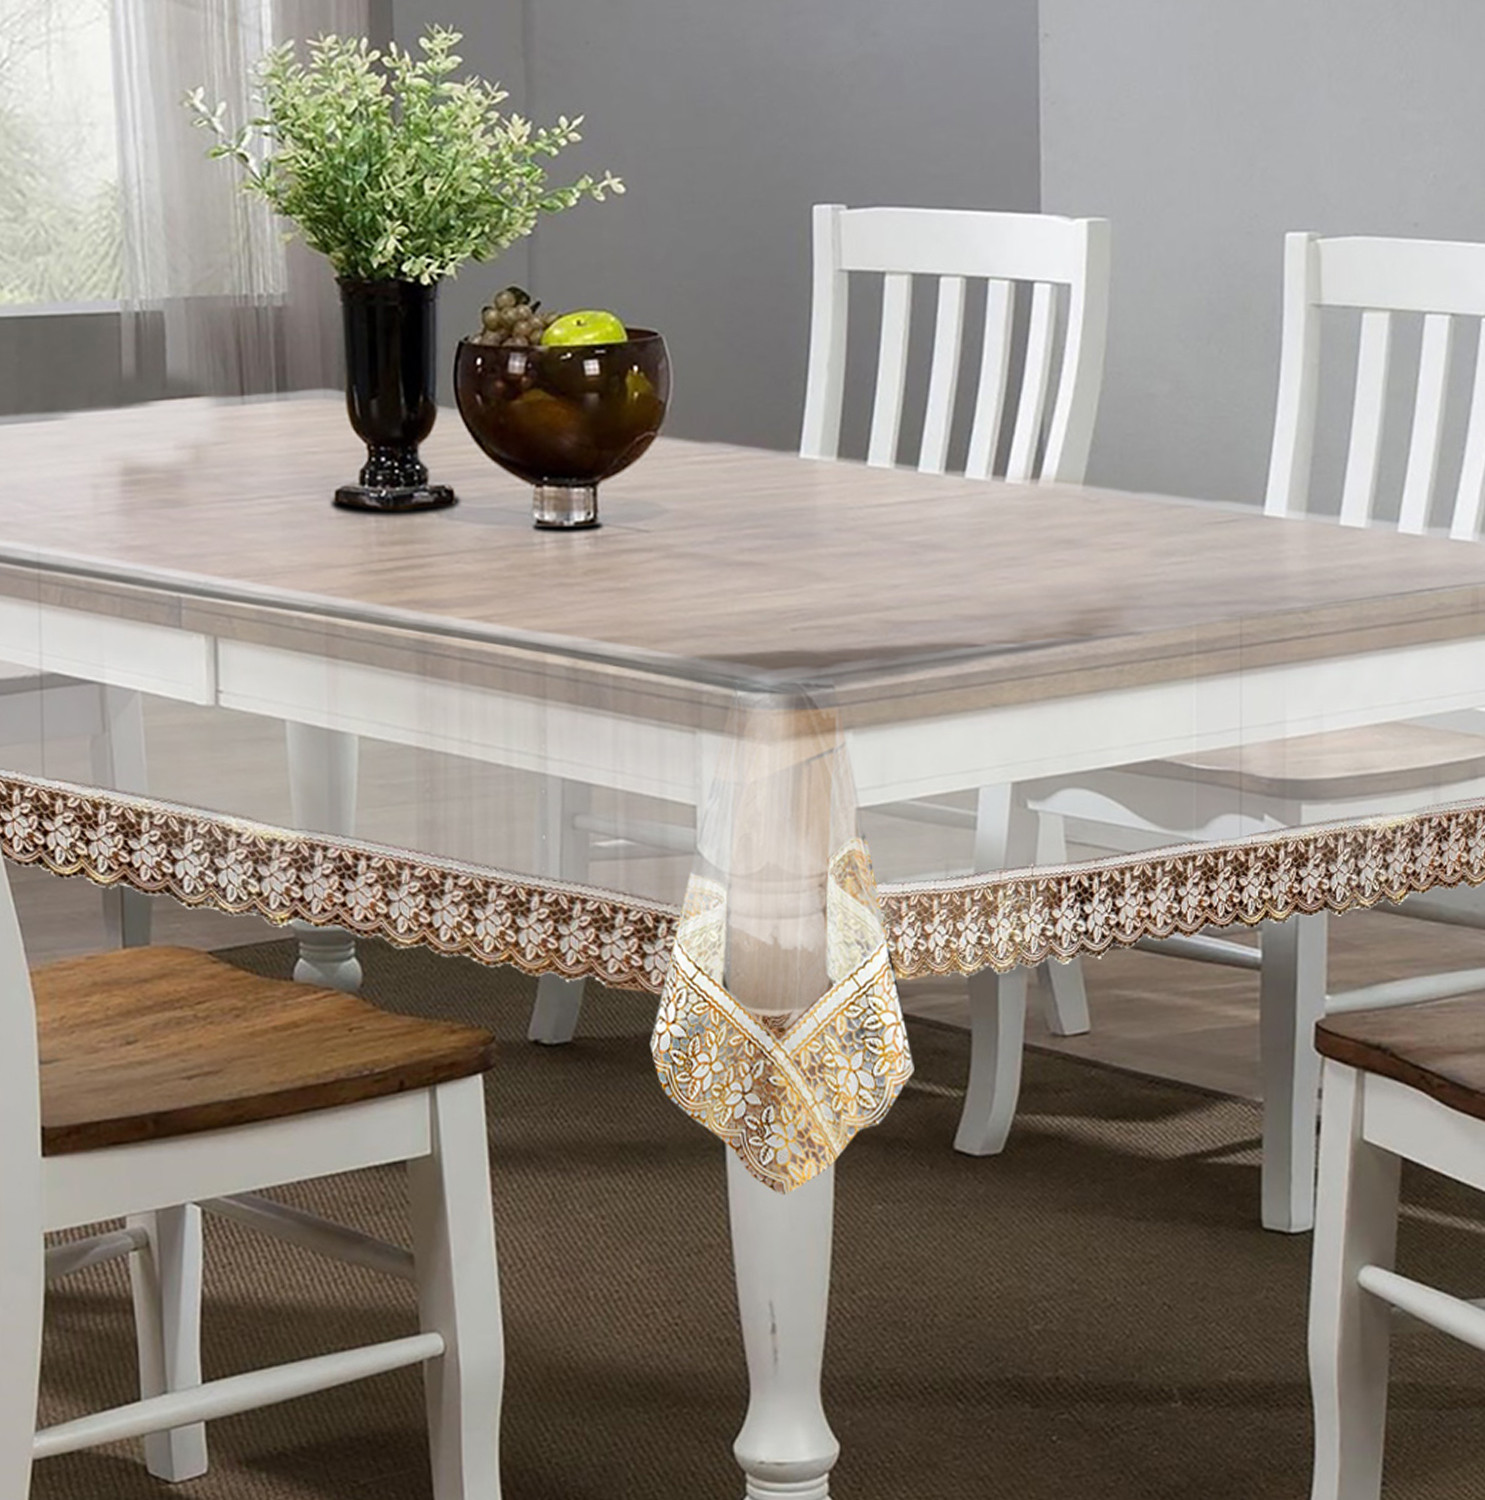 Kuber Industries PVC 4 Seater Tranasparent Dining Table Cover, Protector With Gold Border, 45